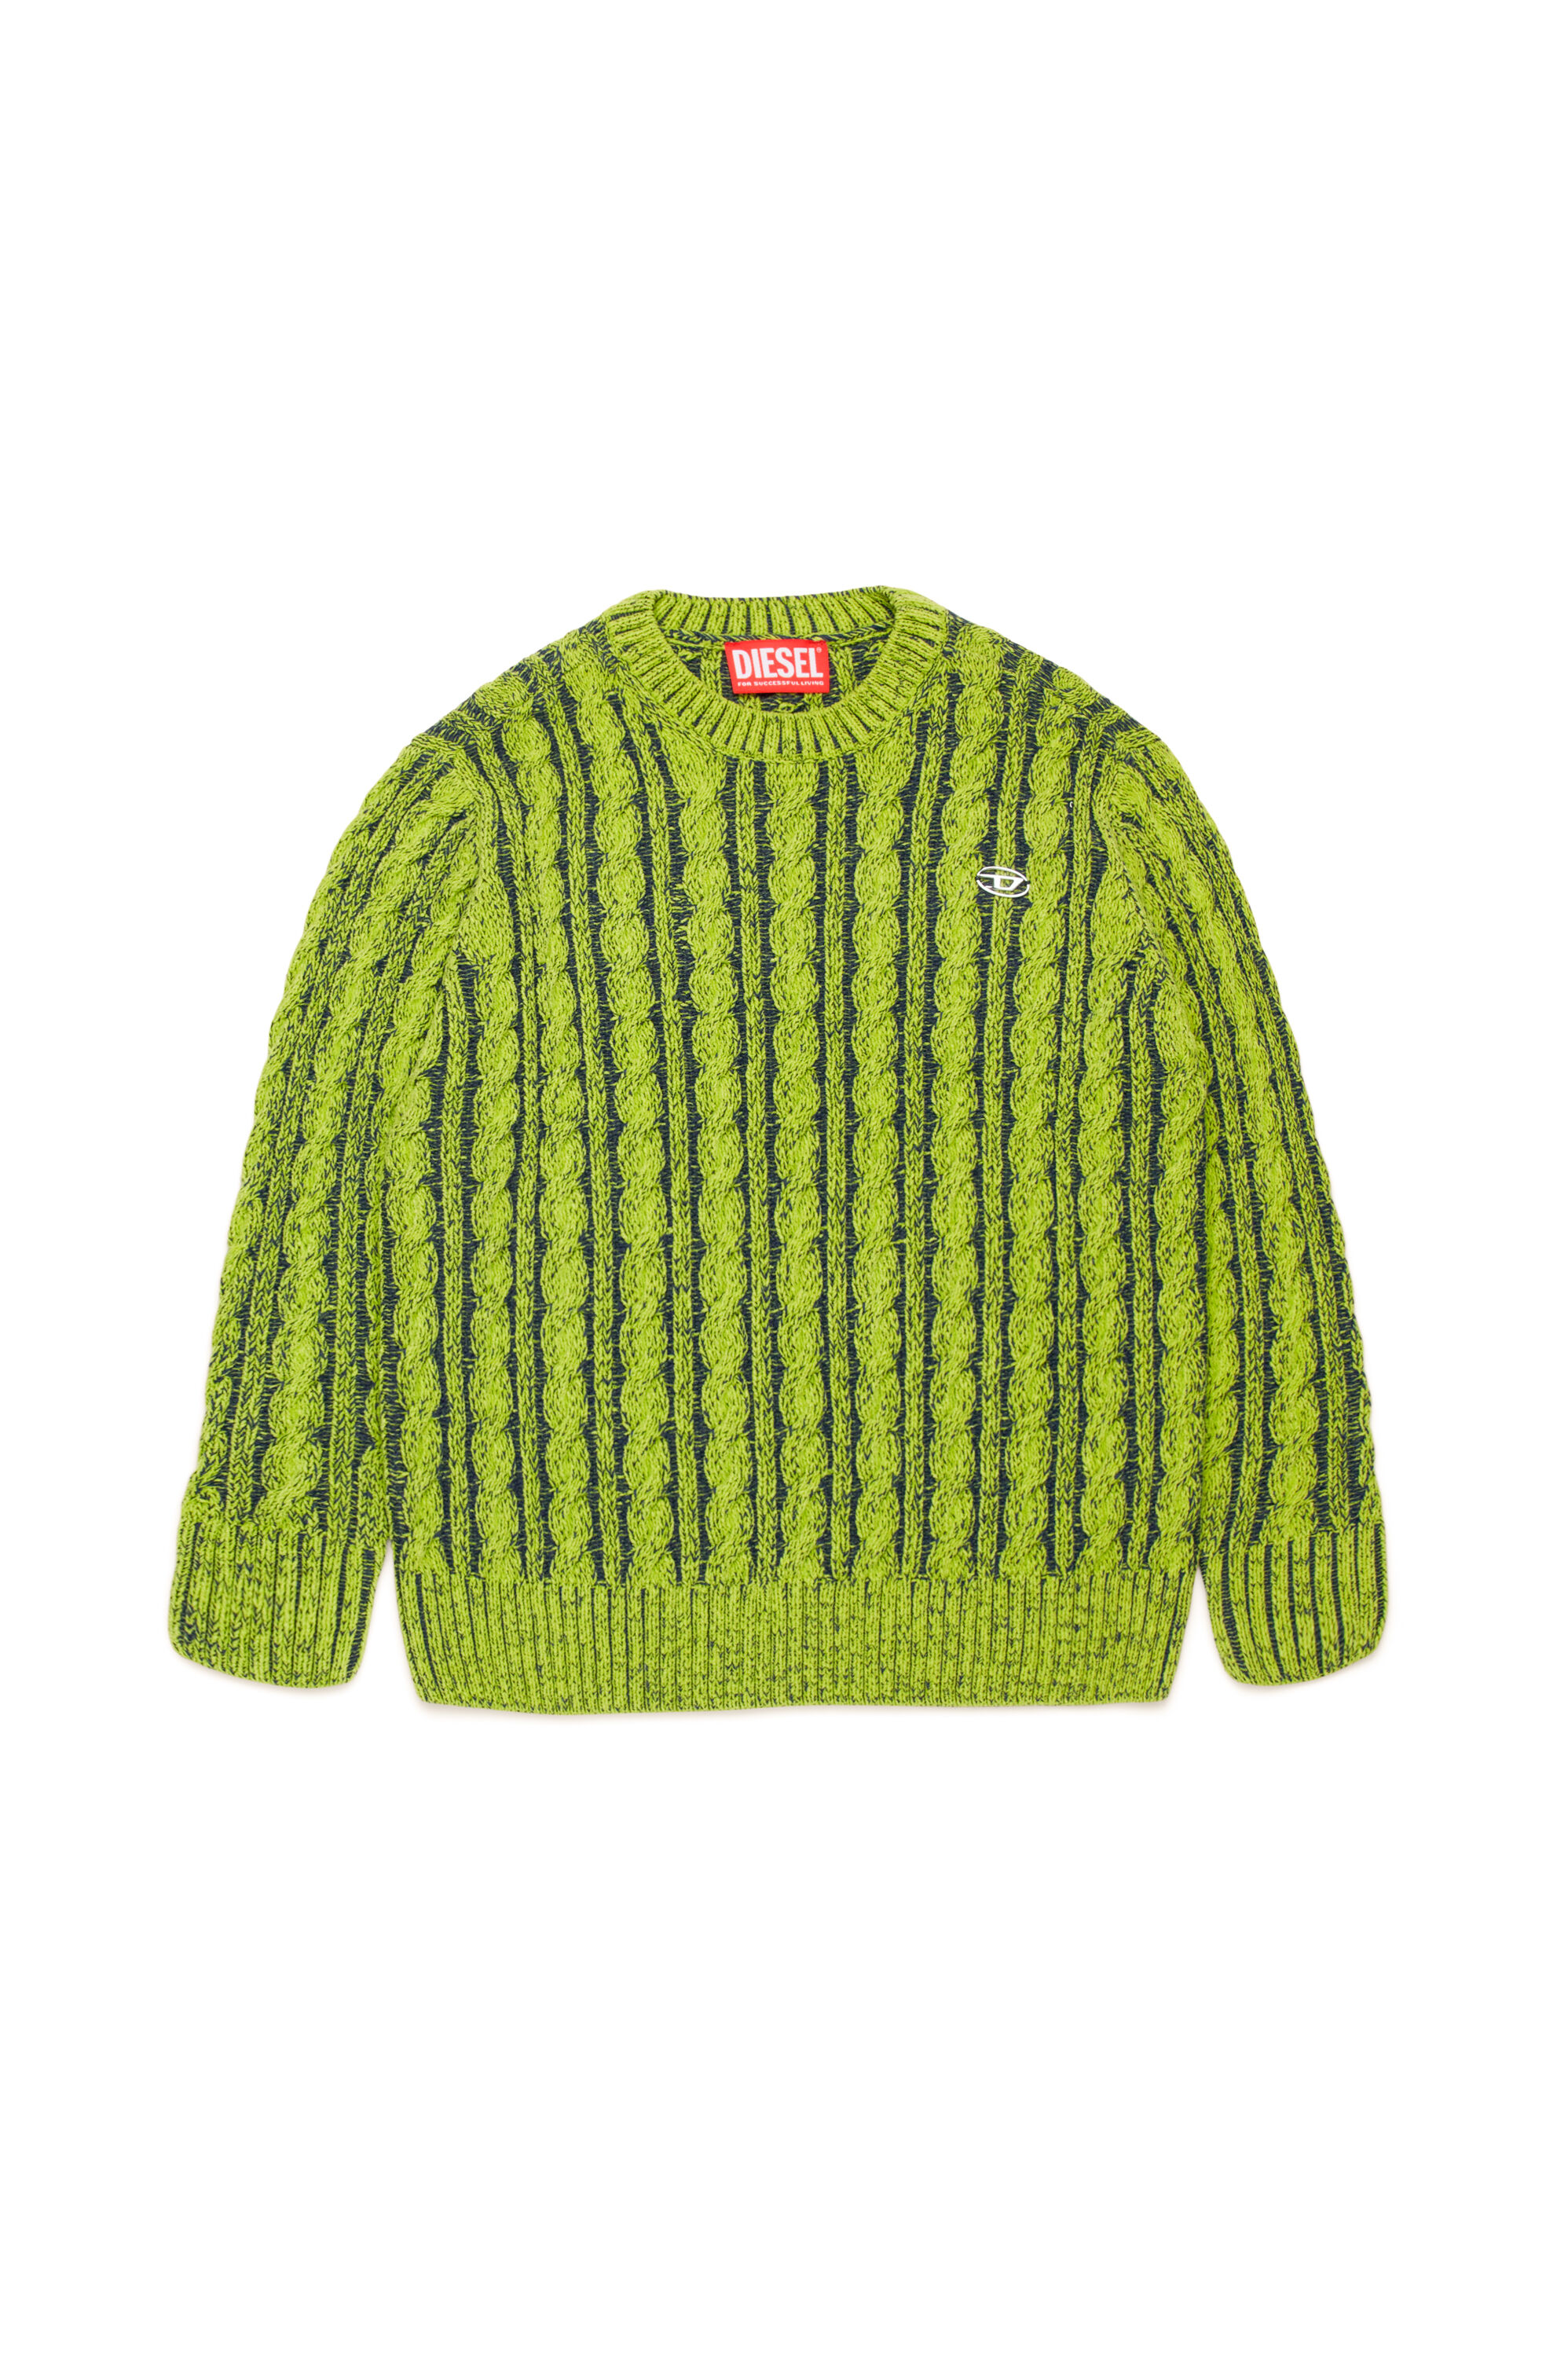 Diesel - KMOXIA OVER, Unisex Cable-knit jumper in two-tone yarn in Green - Image 1